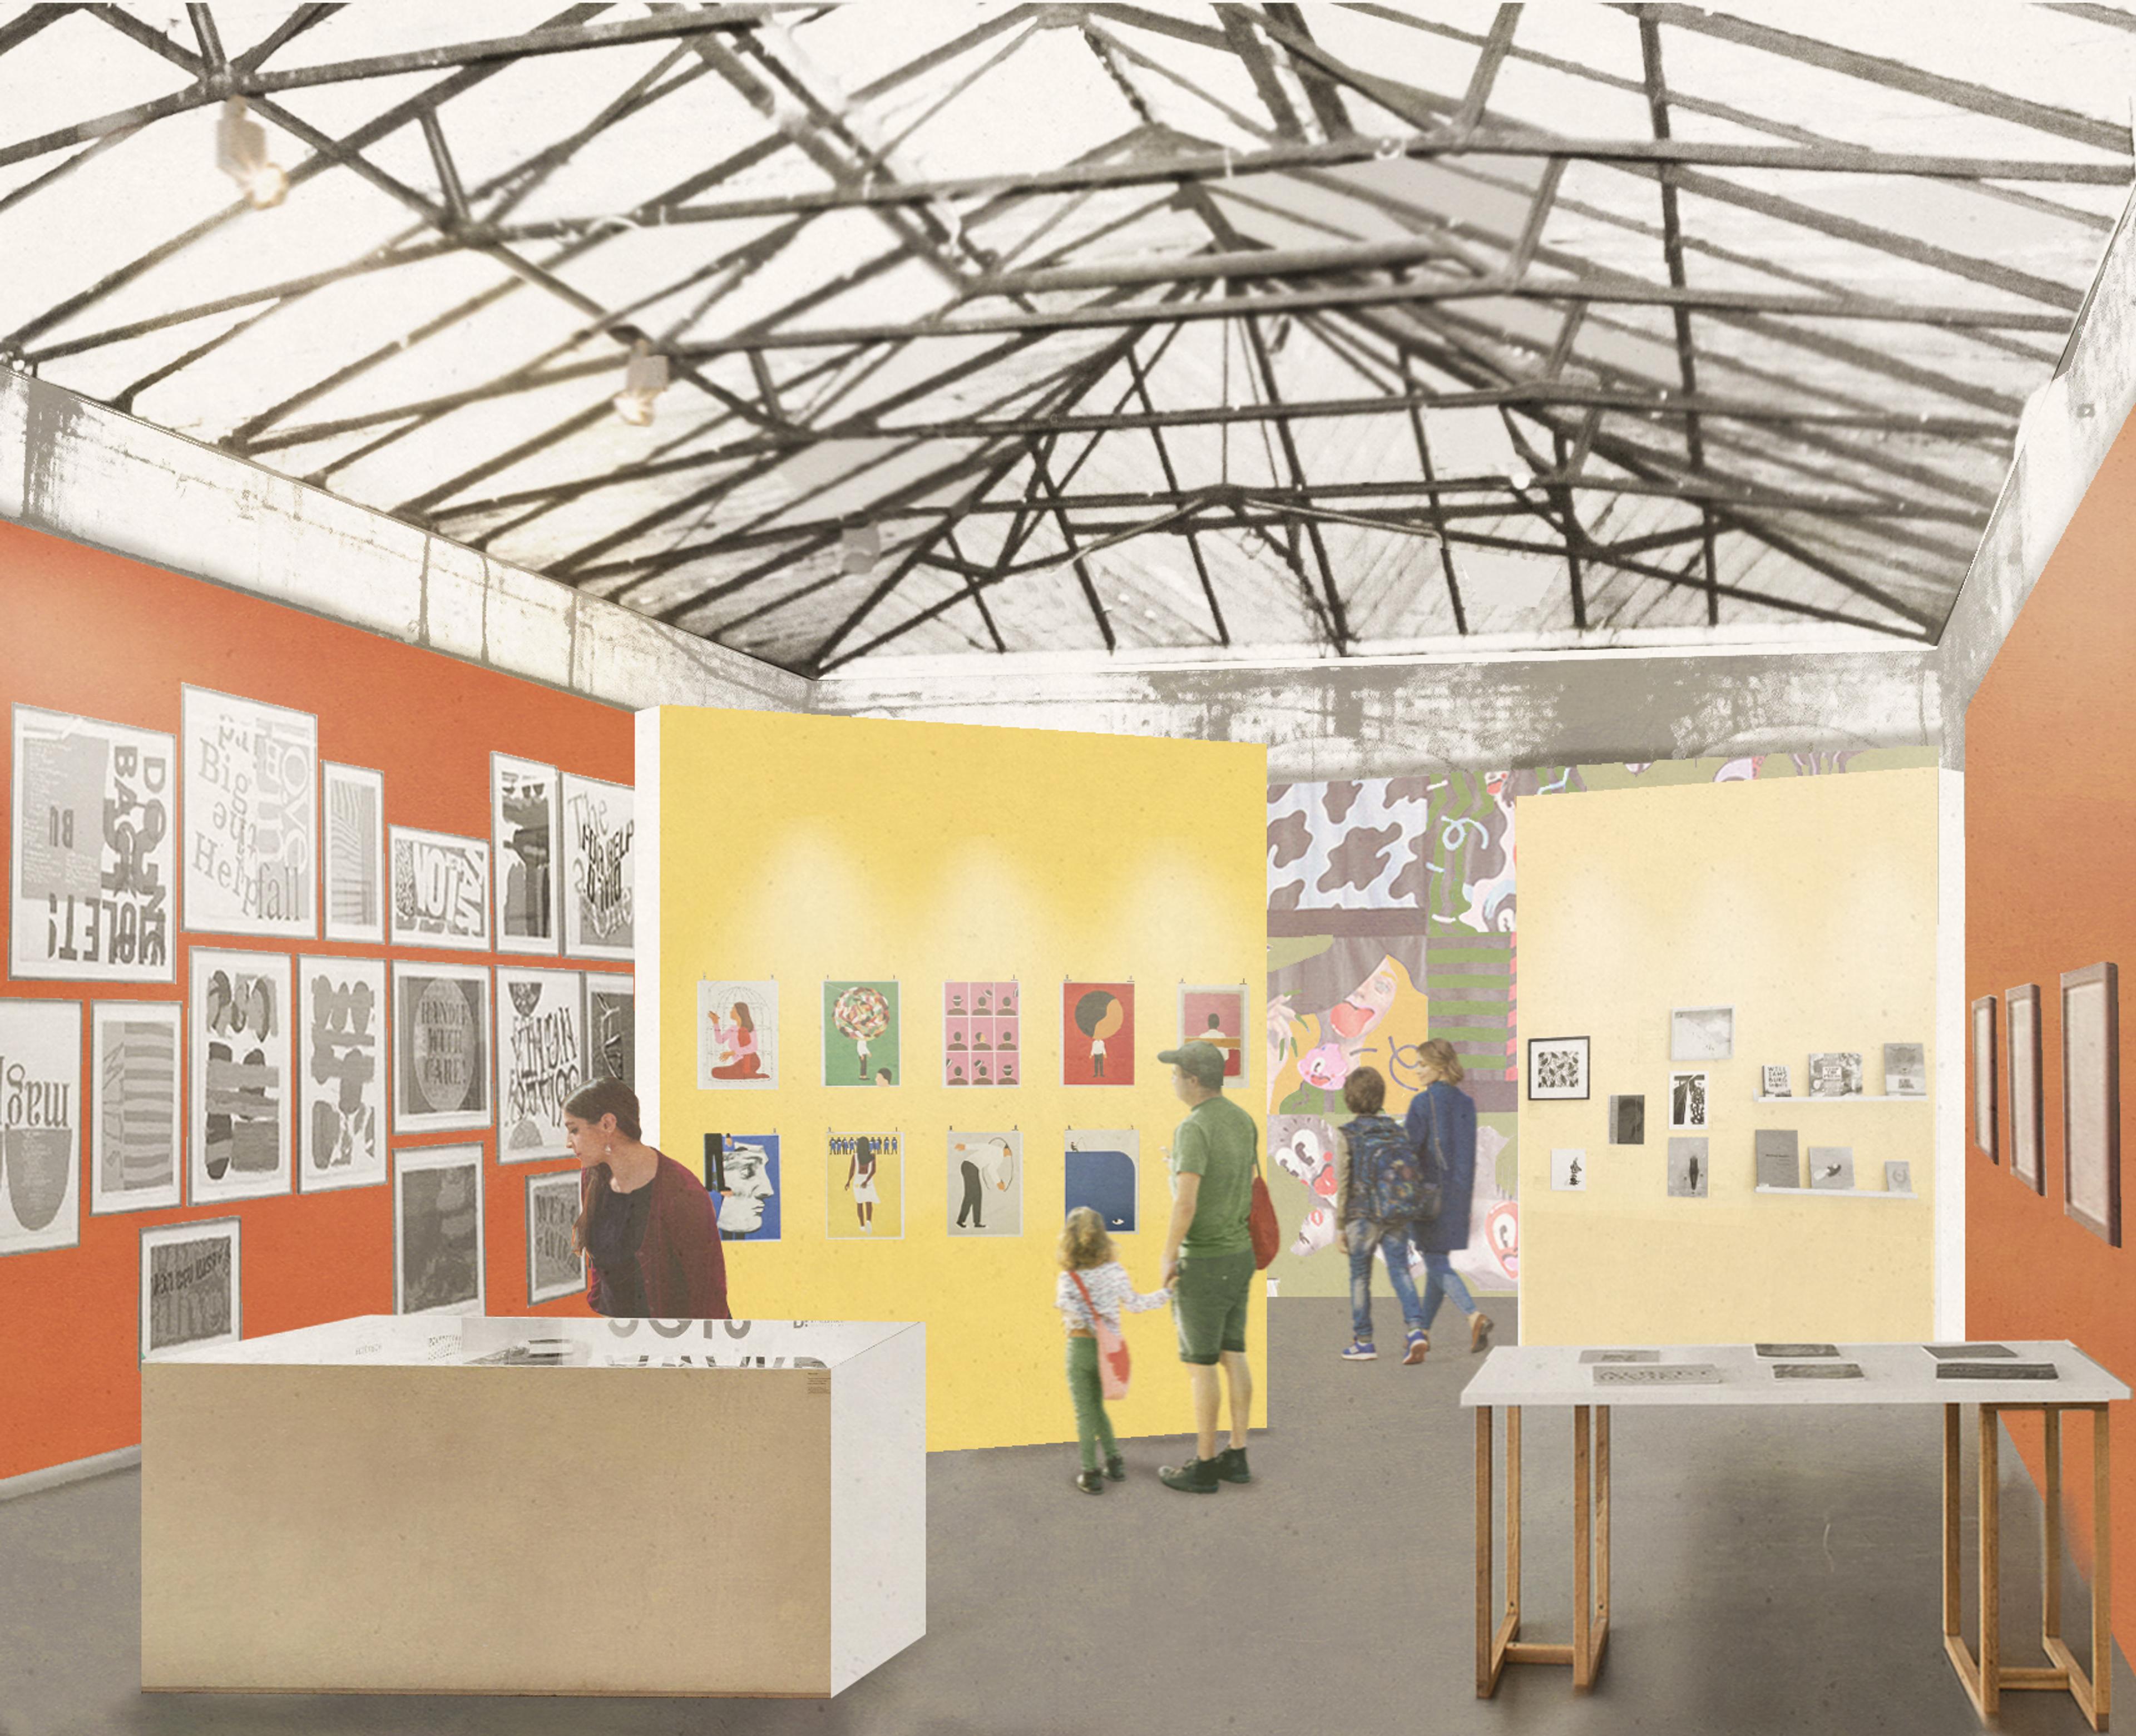 Rendering of exhibition space with exposed roof trusses